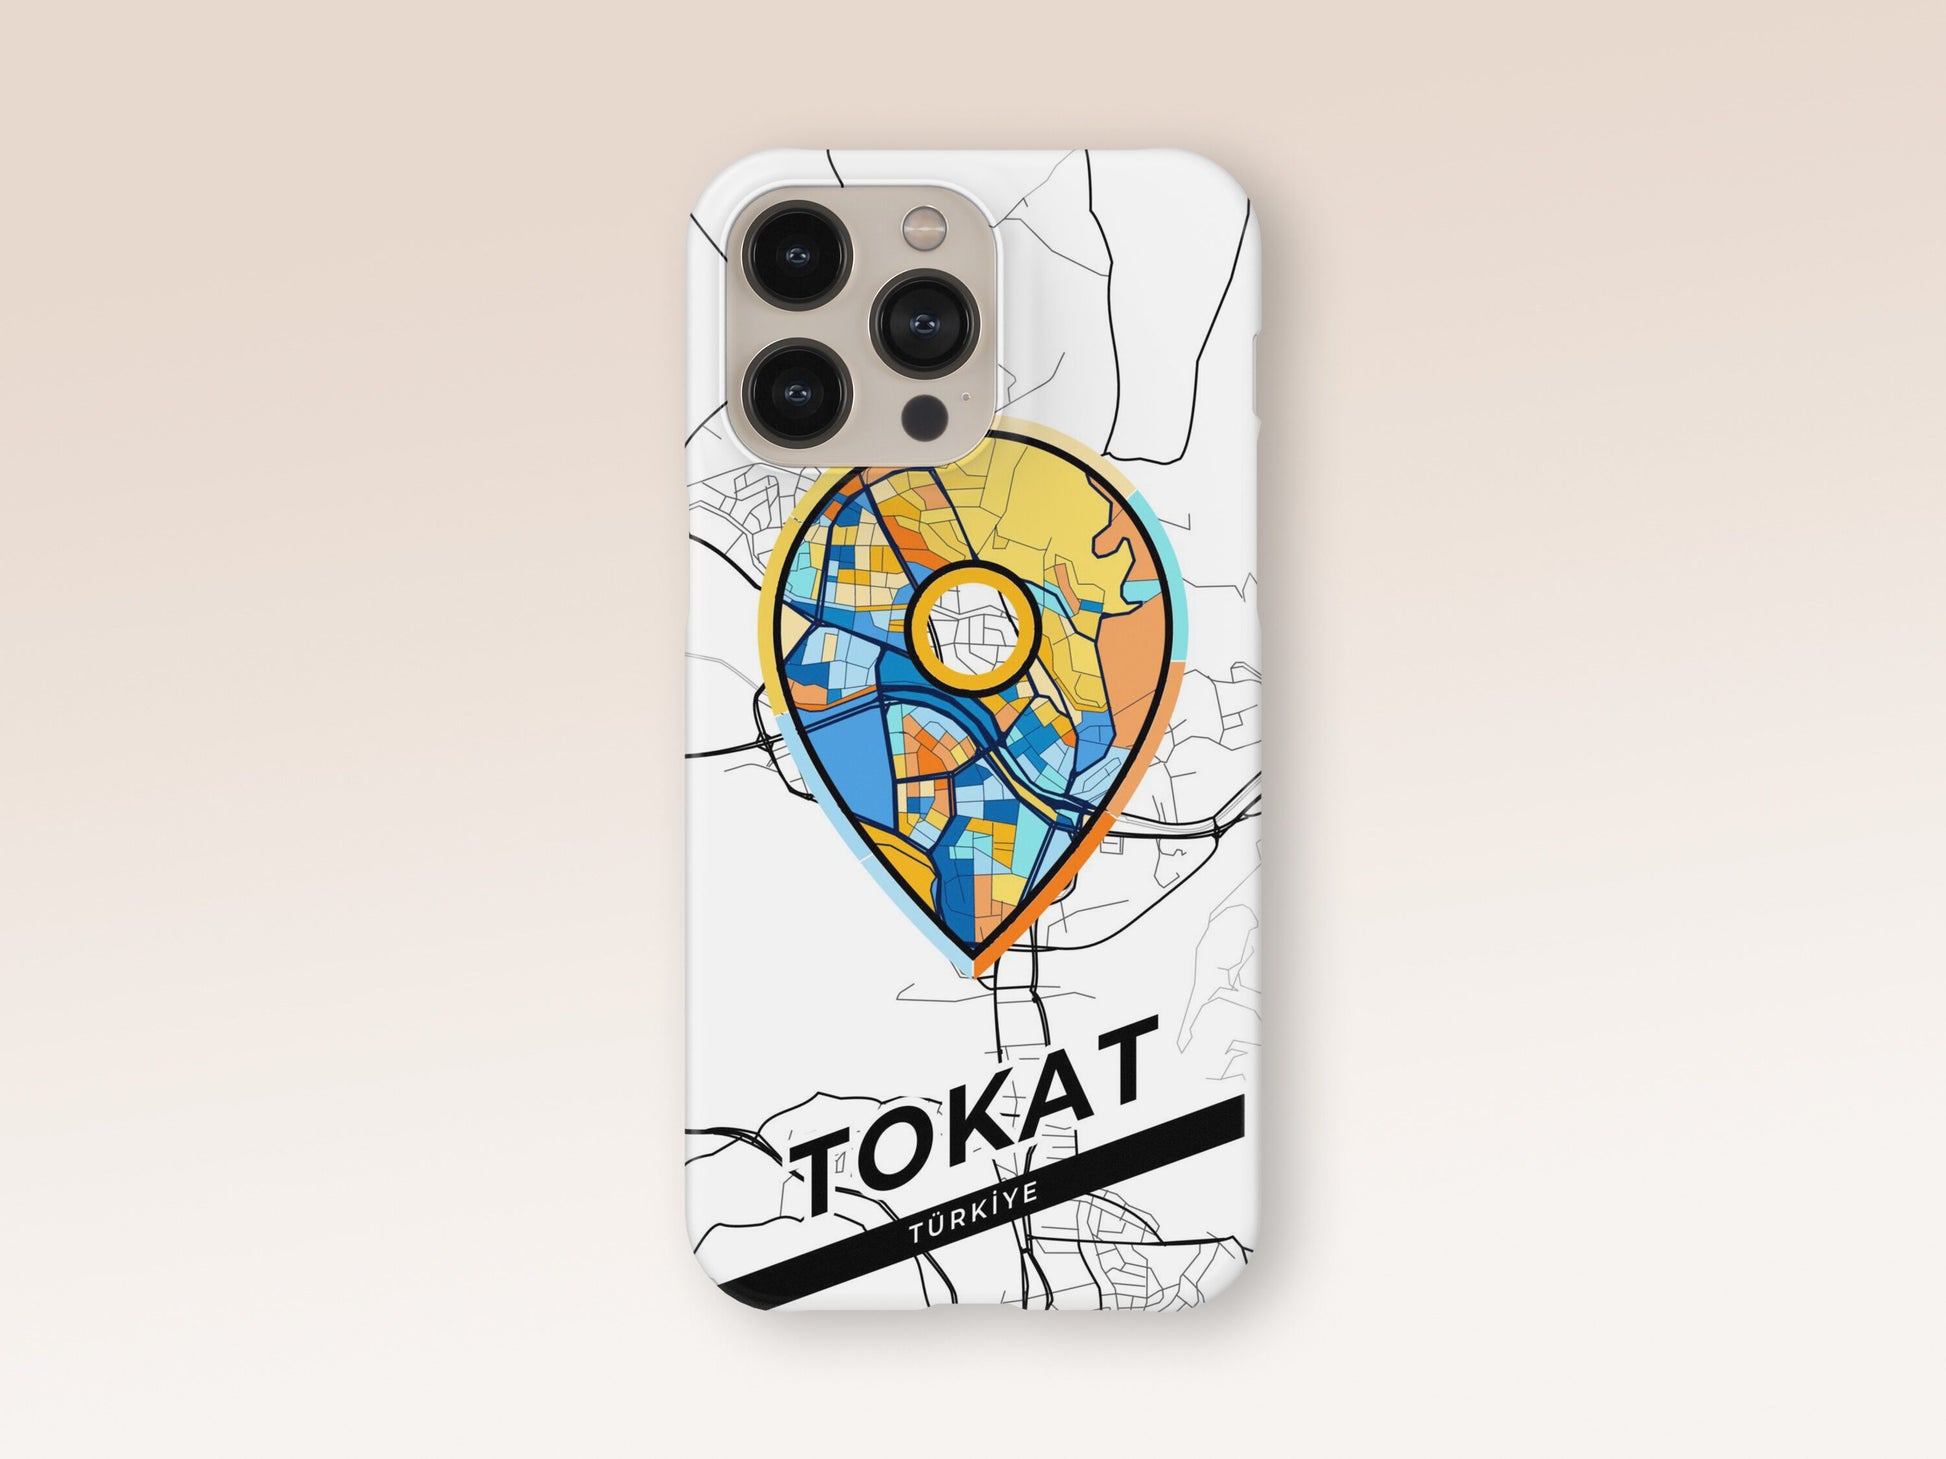 Tokat Turkey slim phone case with colorful icon 1